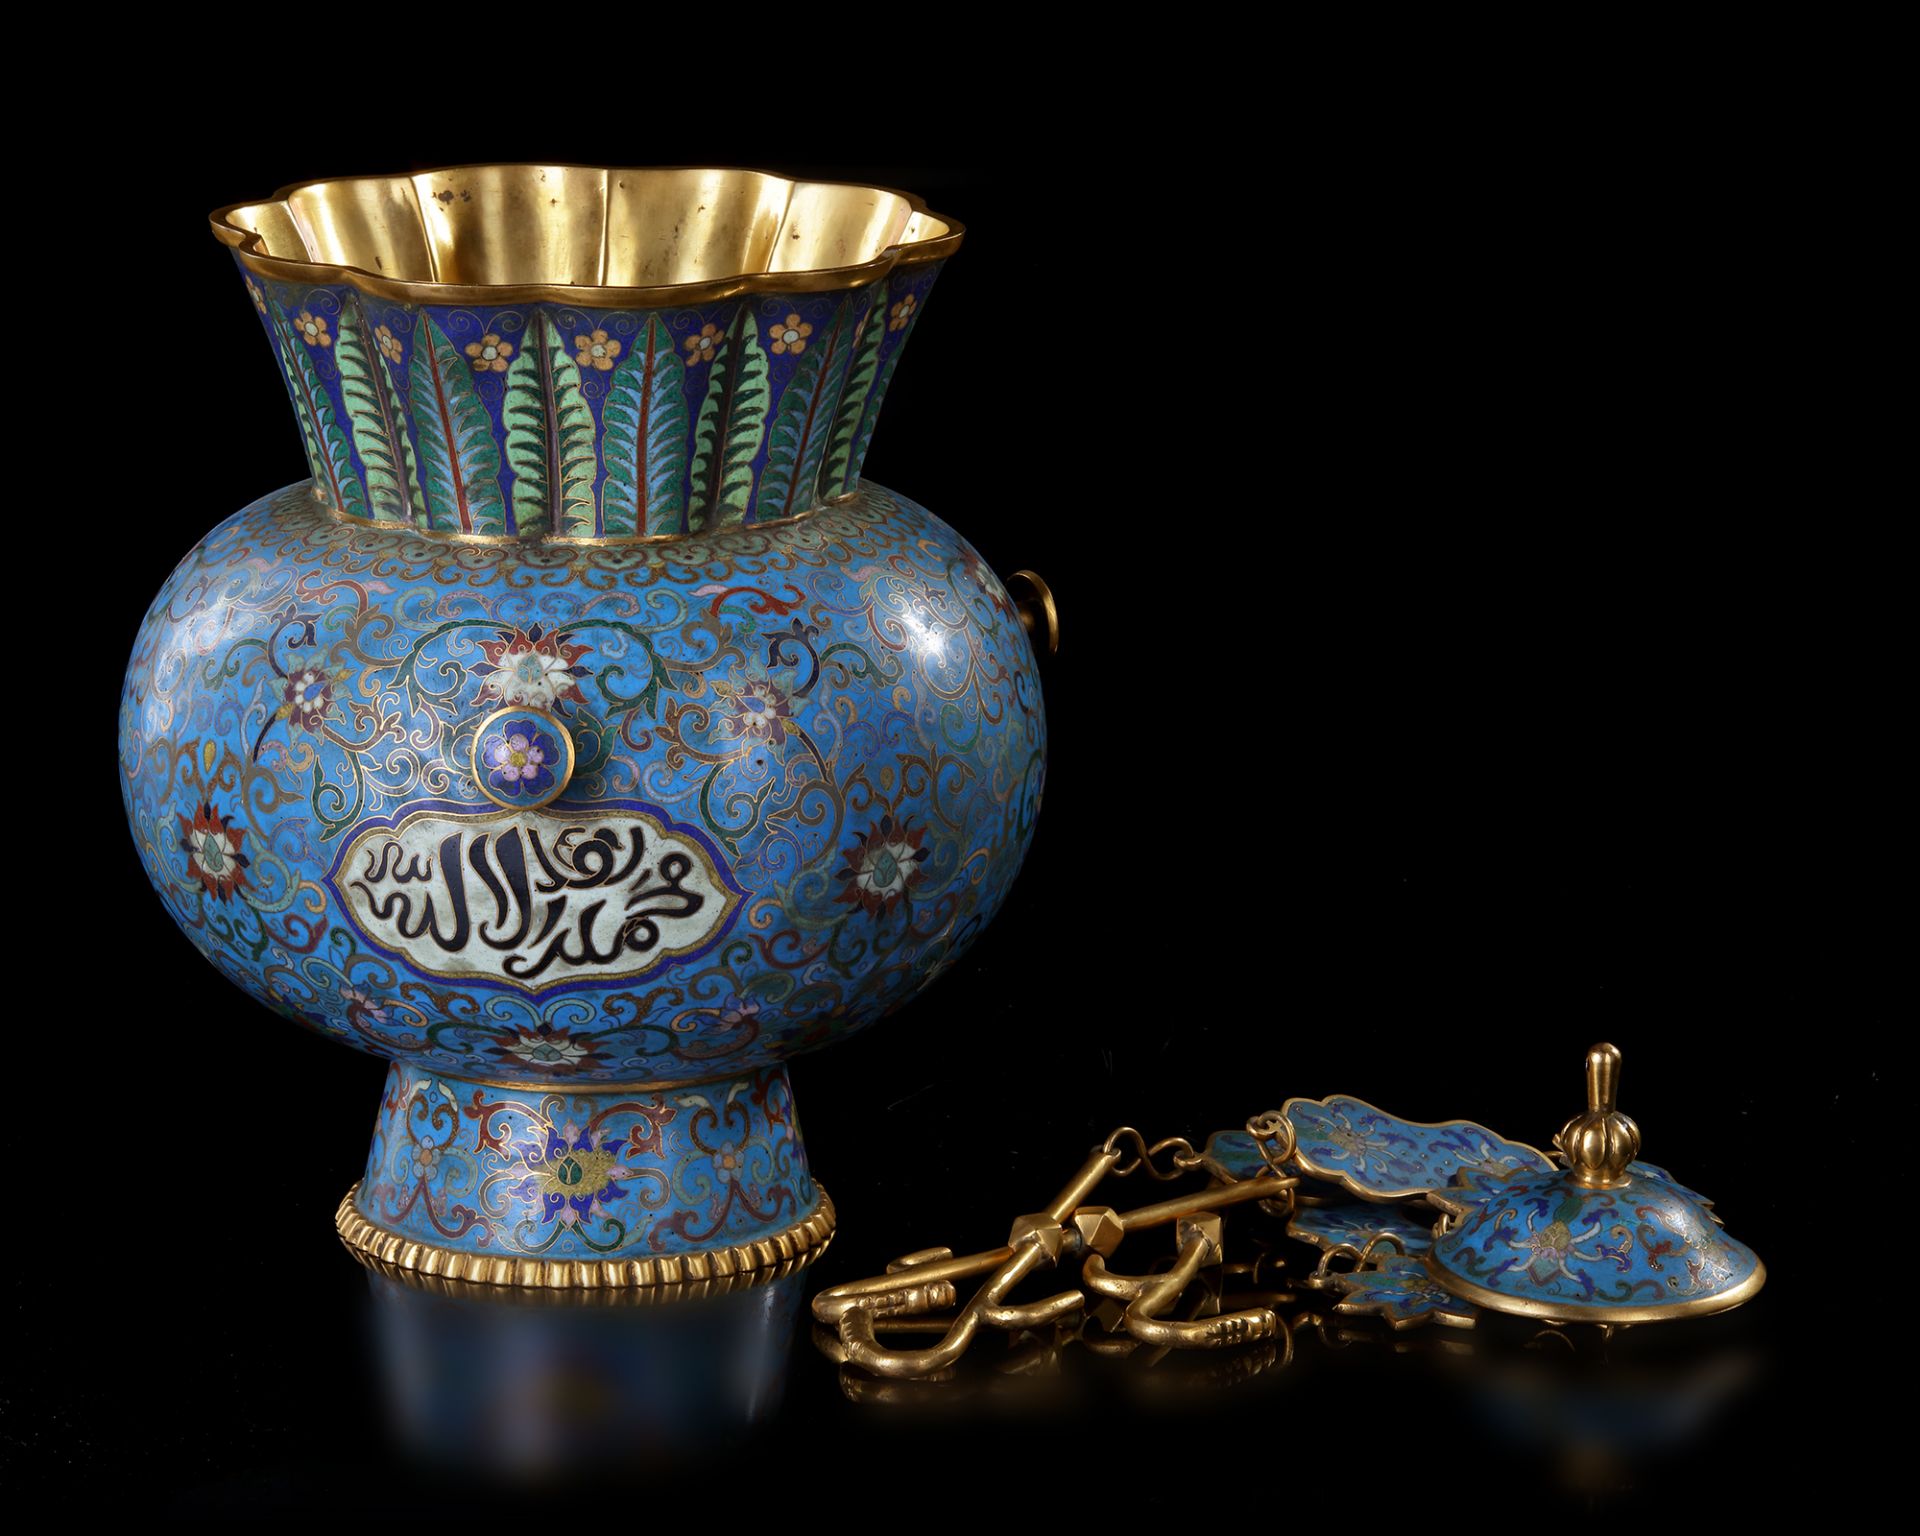 A CHINESE CLOISONNÉ MOSQUE LAMP FOR THE ISLAMIC MARKET, LATE 19TH CENTURY - Image 9 of 10